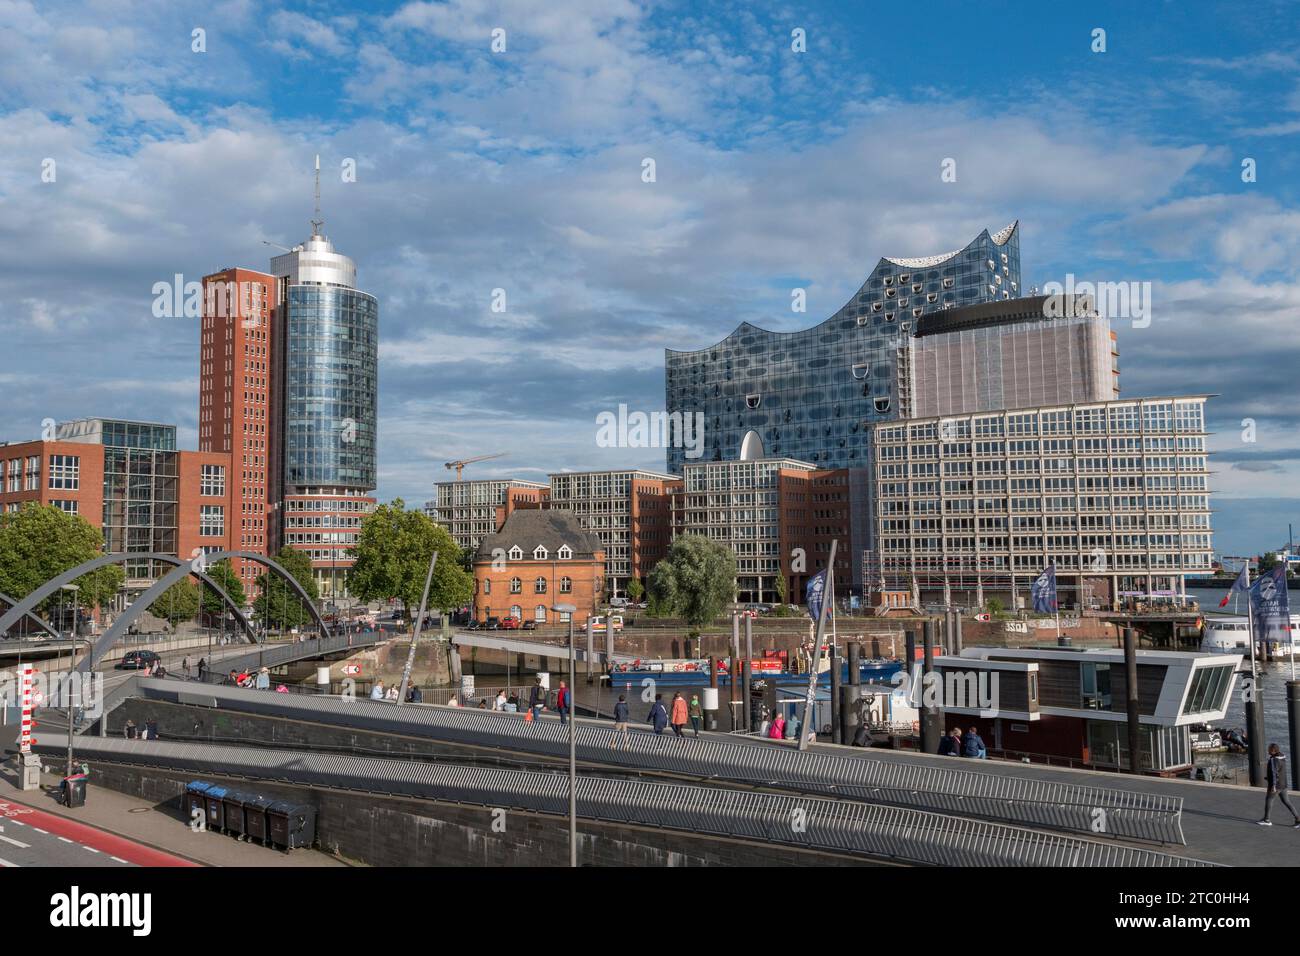 General view towards the historic Speicherstadt (now modernised) district including Columbus Haus and Elbphilharmonie, Hamburg, Germany. Stock Photo